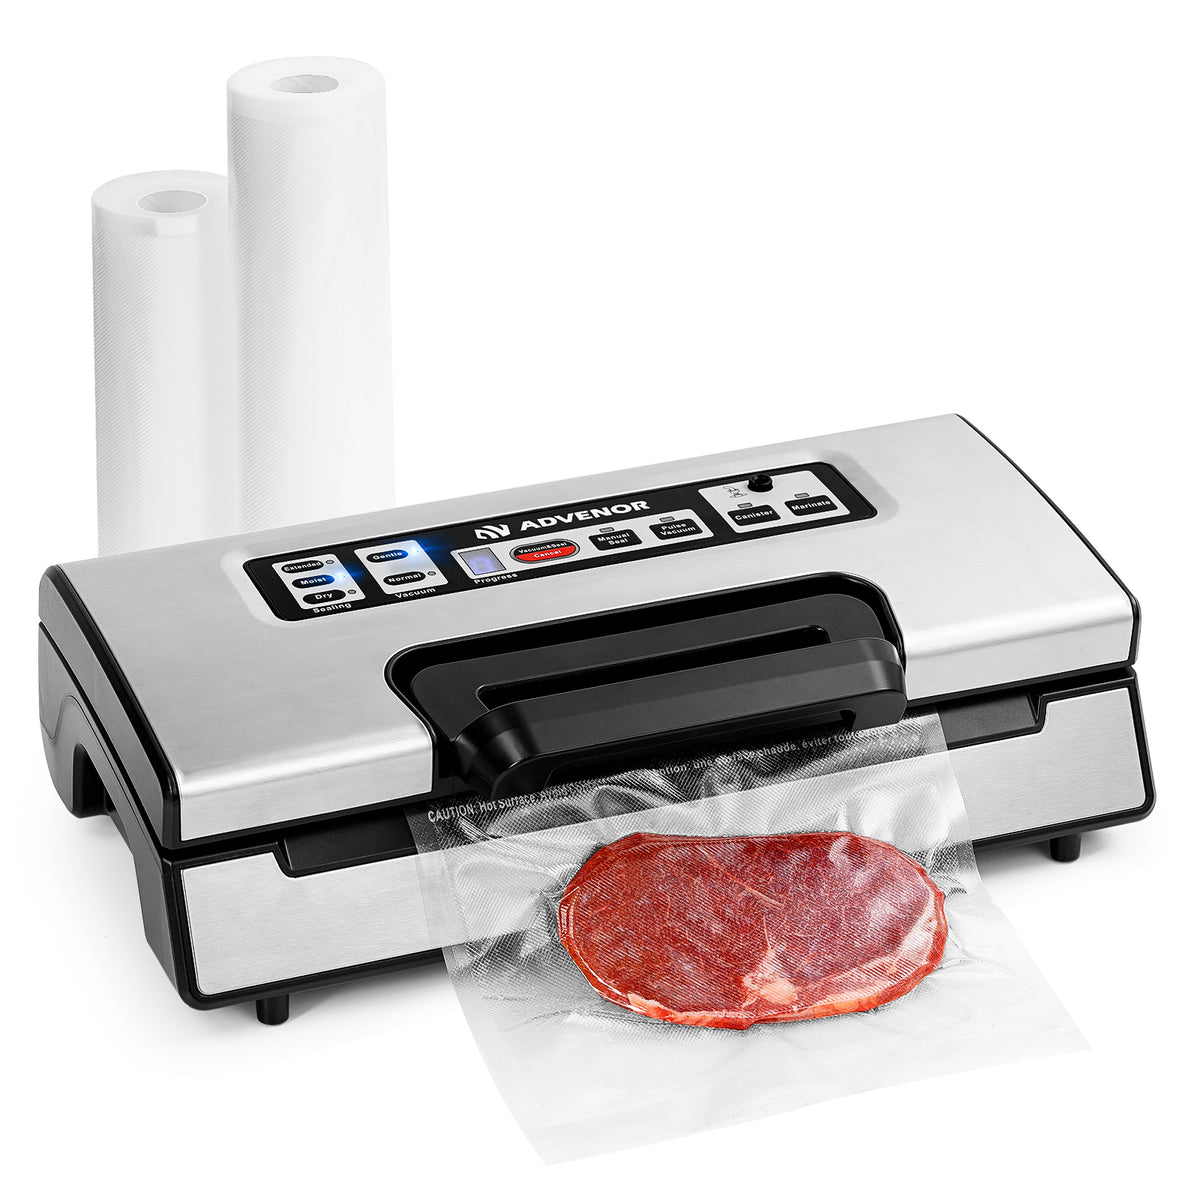 ADVENOR Vacuum Sealer Machine with Cutter Widened Double Sealing